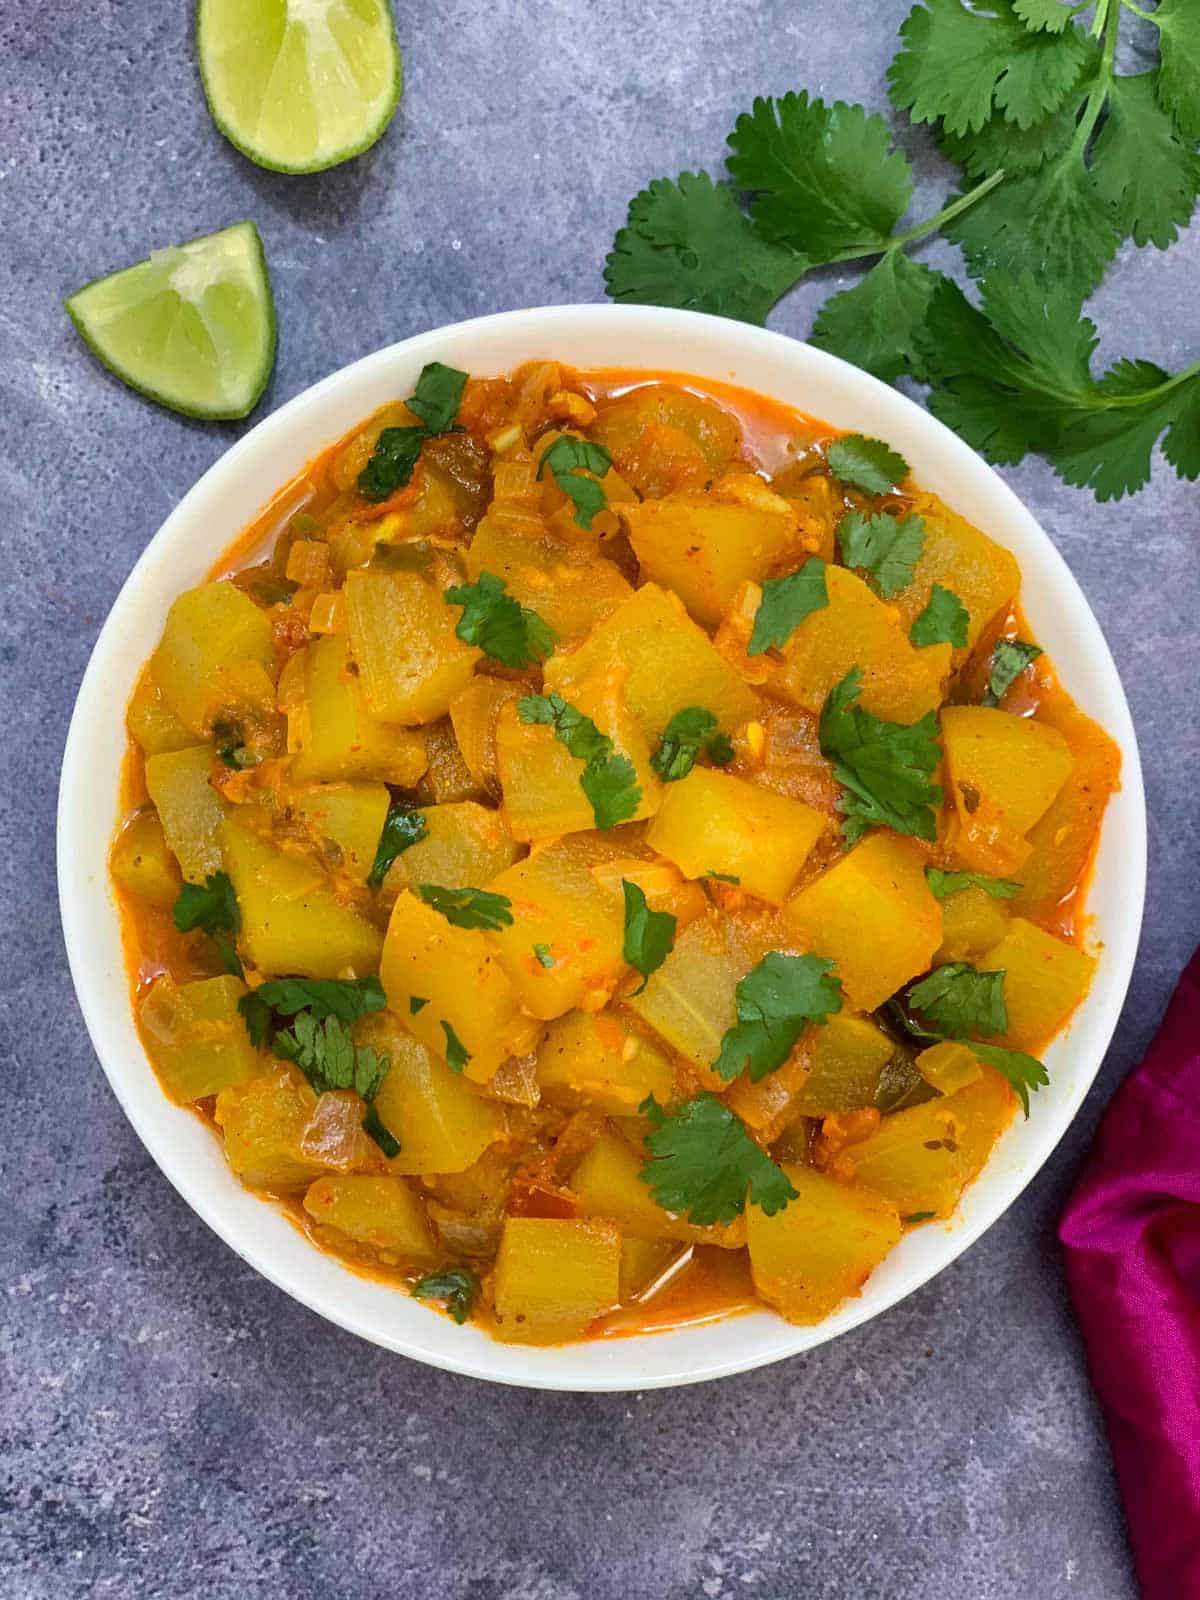 lauki sabji/bottle gourd curry served in a bowl garnished with coriander and lemon wedges and coriander leaves on the side